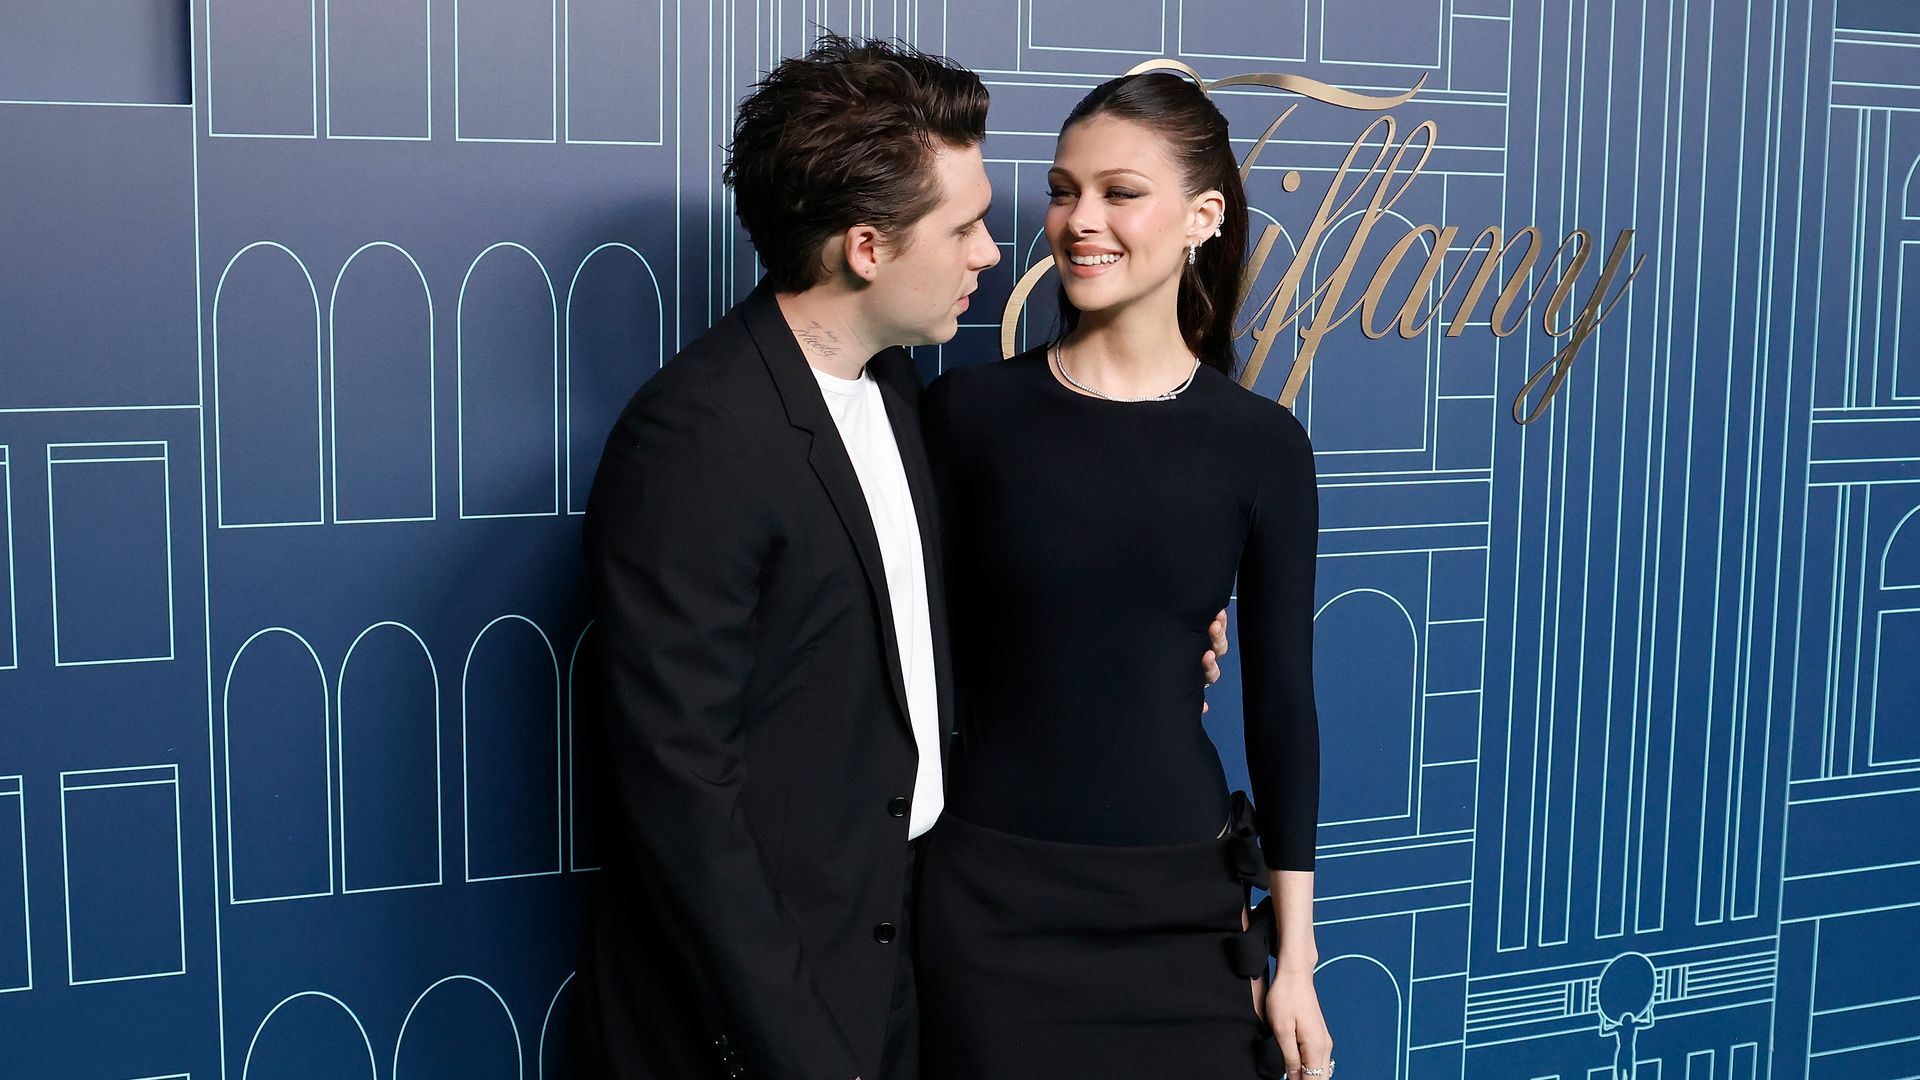 Nicola Peltz packs on PDA during loved-up appearance with husband Brooklyn Beckham